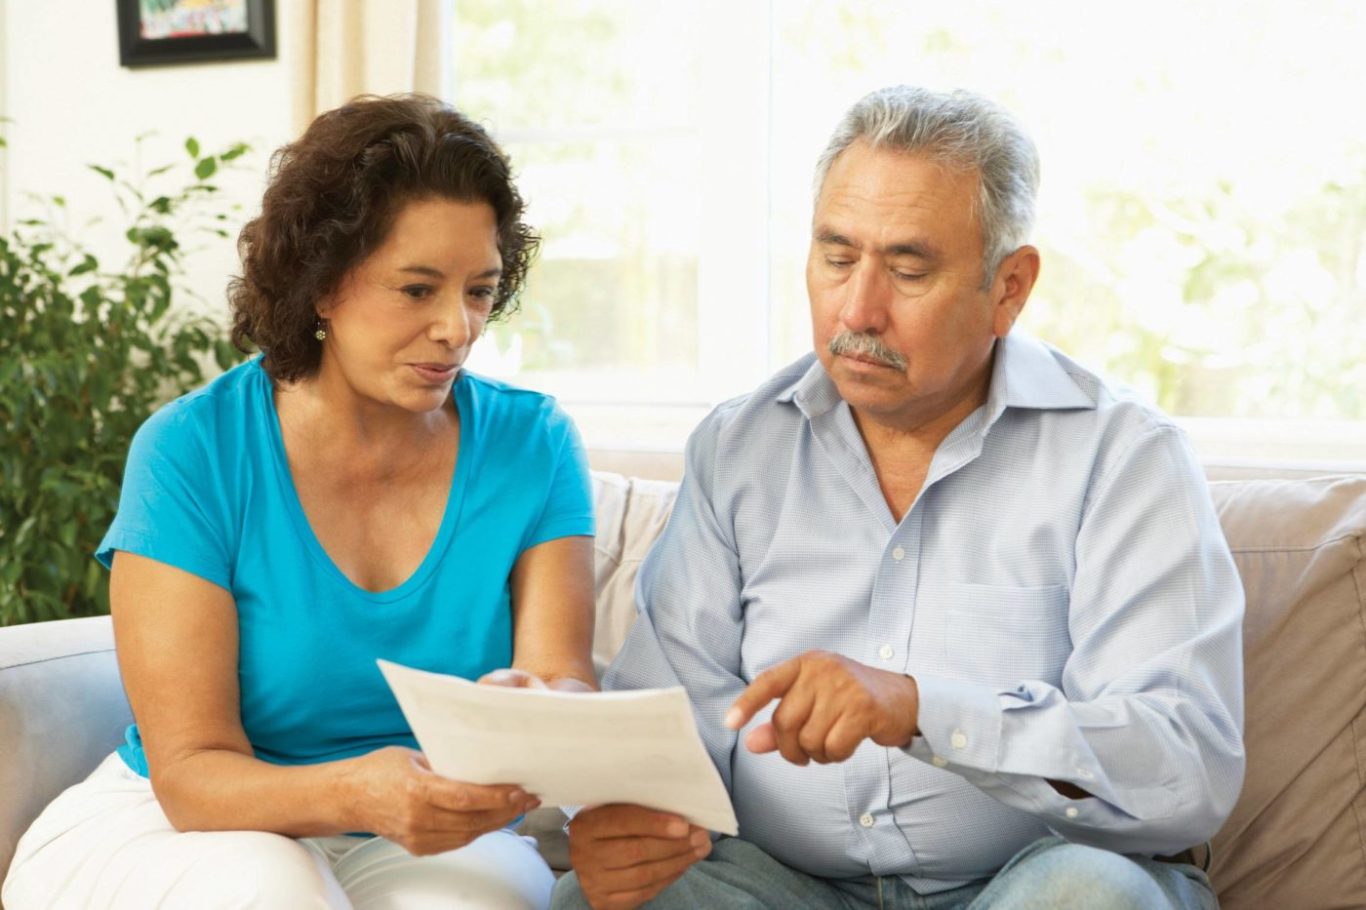 Elderly couple examining document, reviewing caregiver support and resources